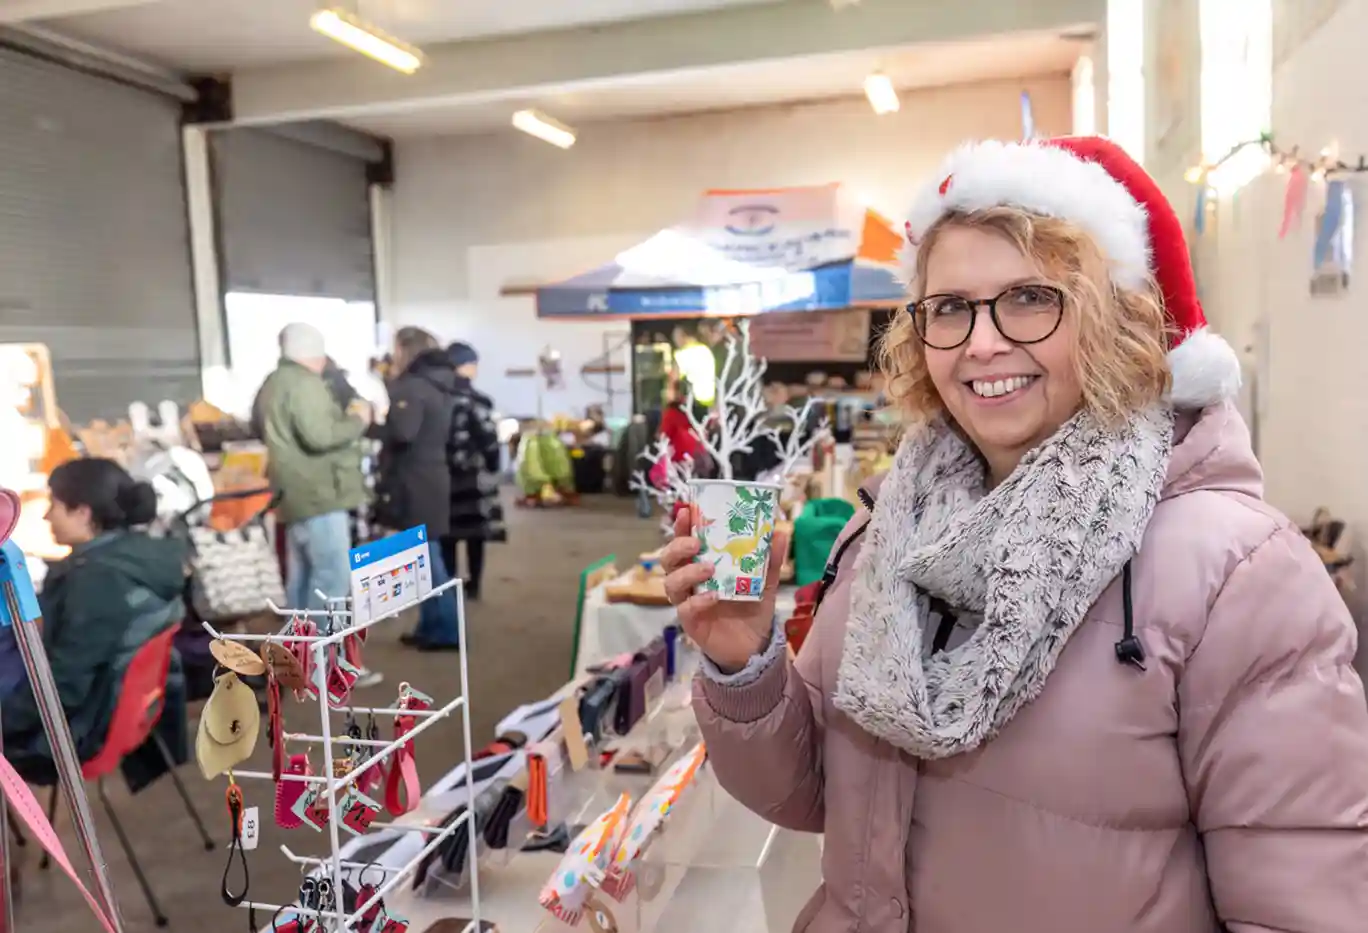 A smiling woman wearing a Santa hat with market stalls in the background at Waterbeach Christmas market.